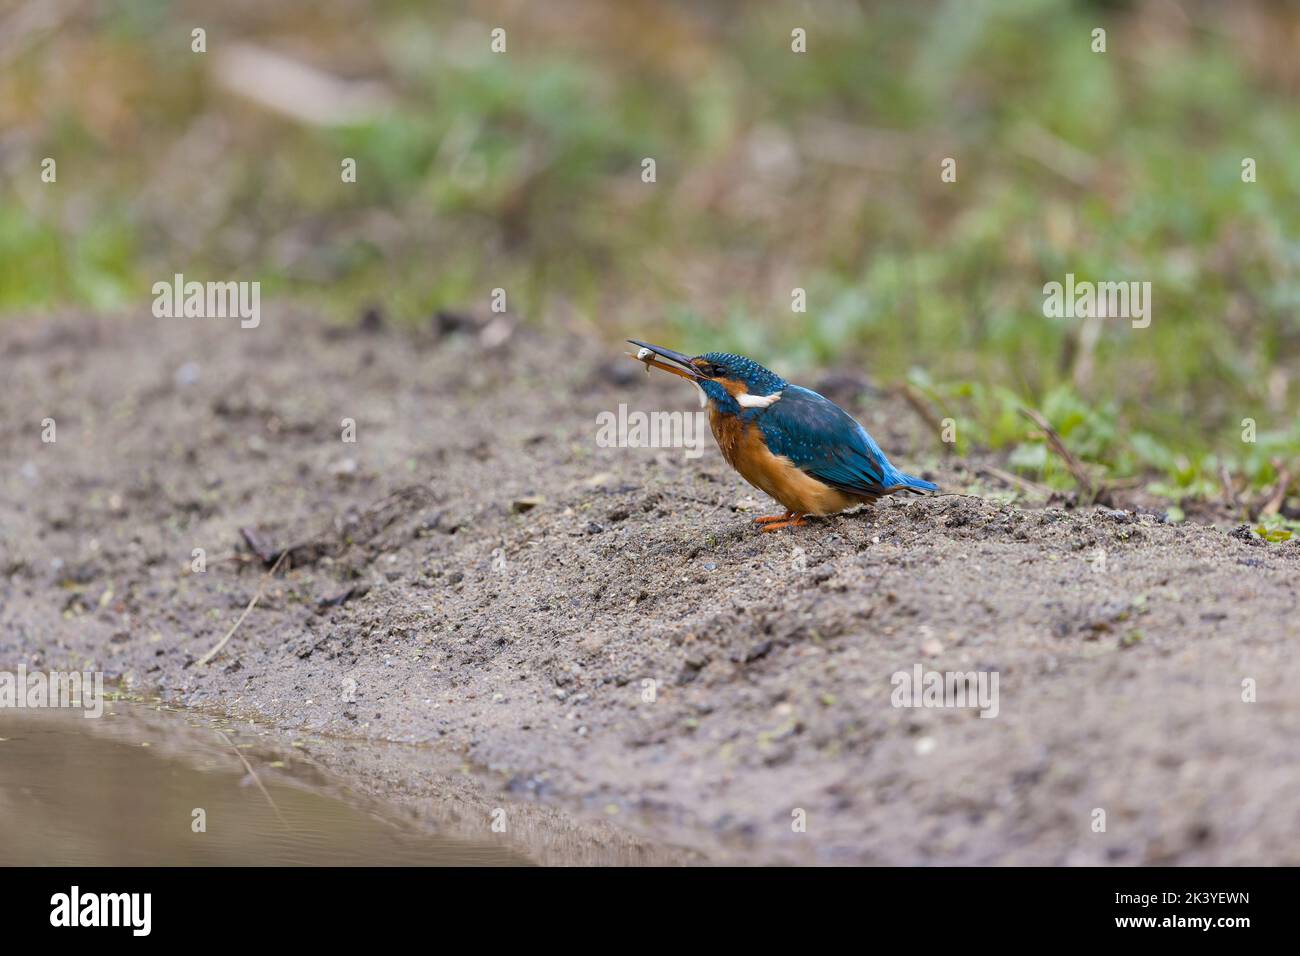 Common kingfisher Alcedo atthis, adult female standing on ground with Three-spined stickleback Gasterosteus aculeatus, prey in beak, Suffolk, England, Stock Photo